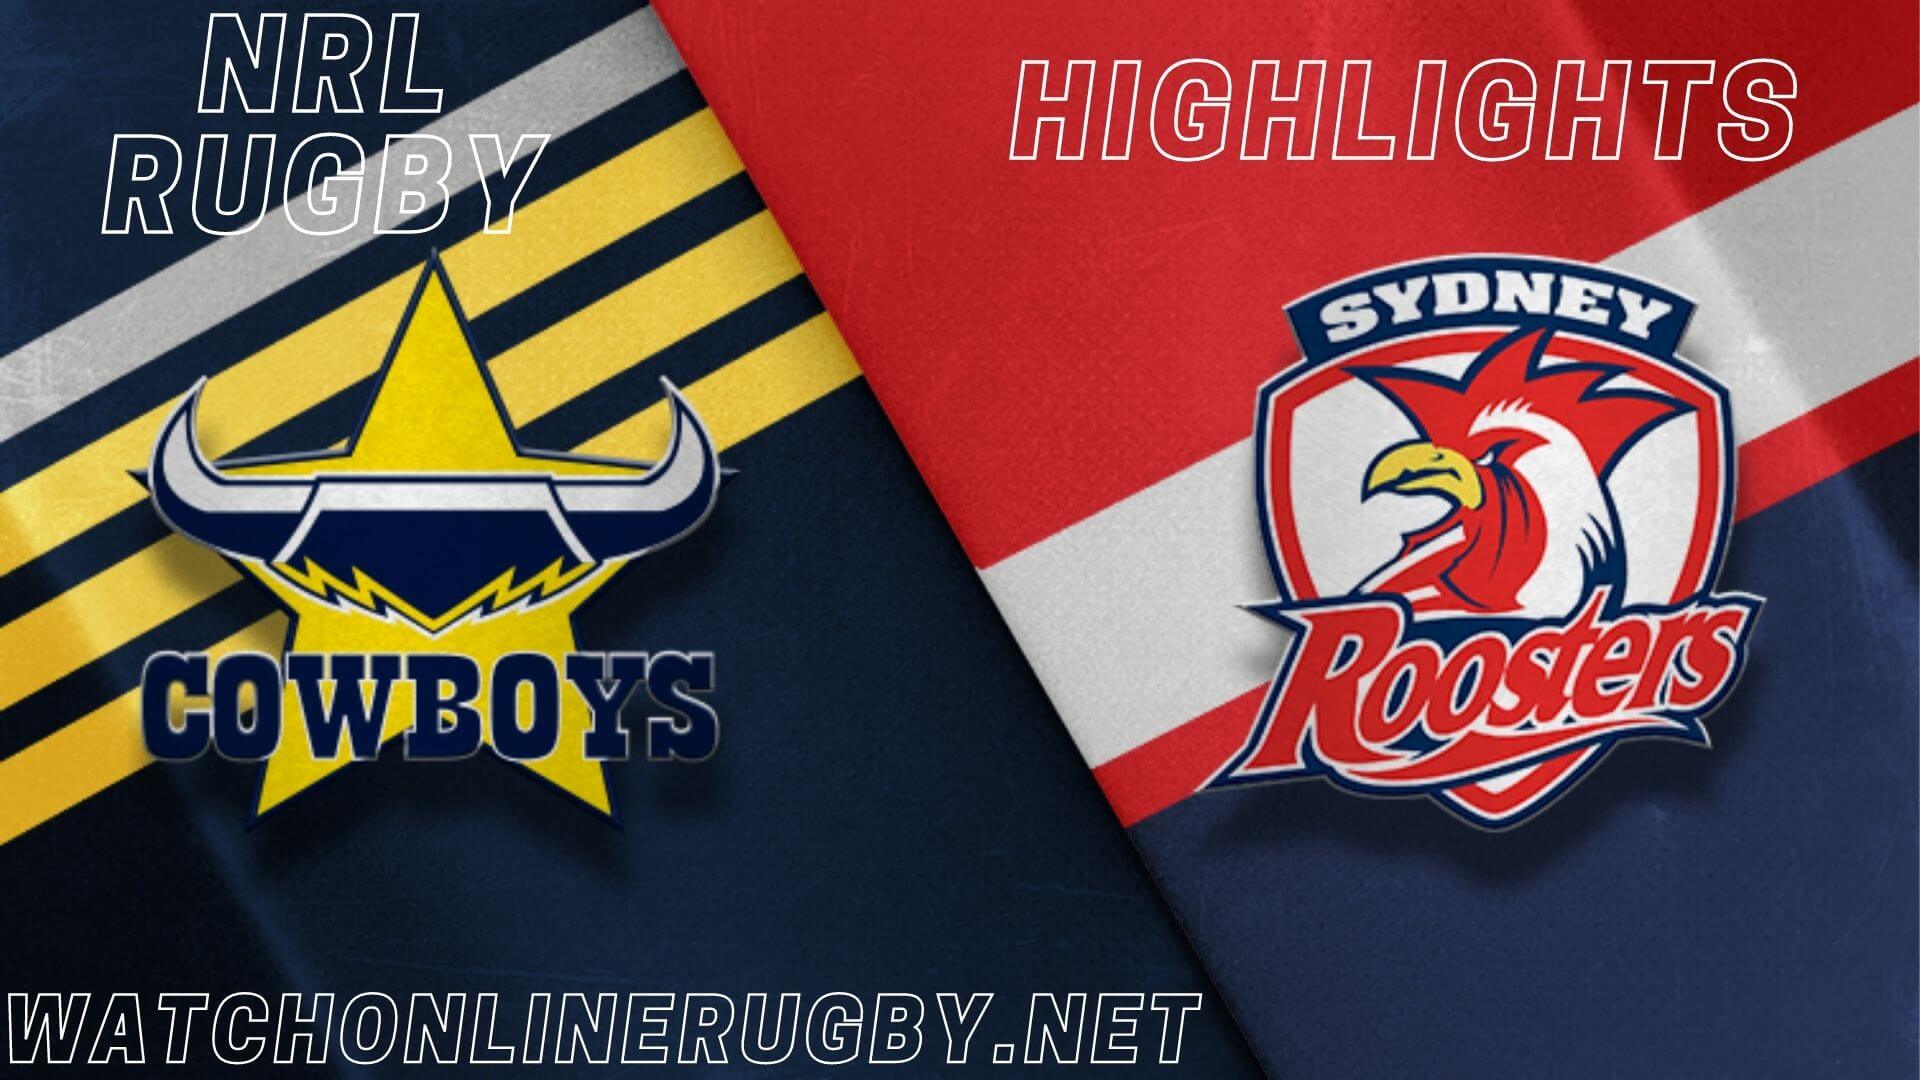 Roosters Vs Cowboys Highlights RD 22 NRL Rugby